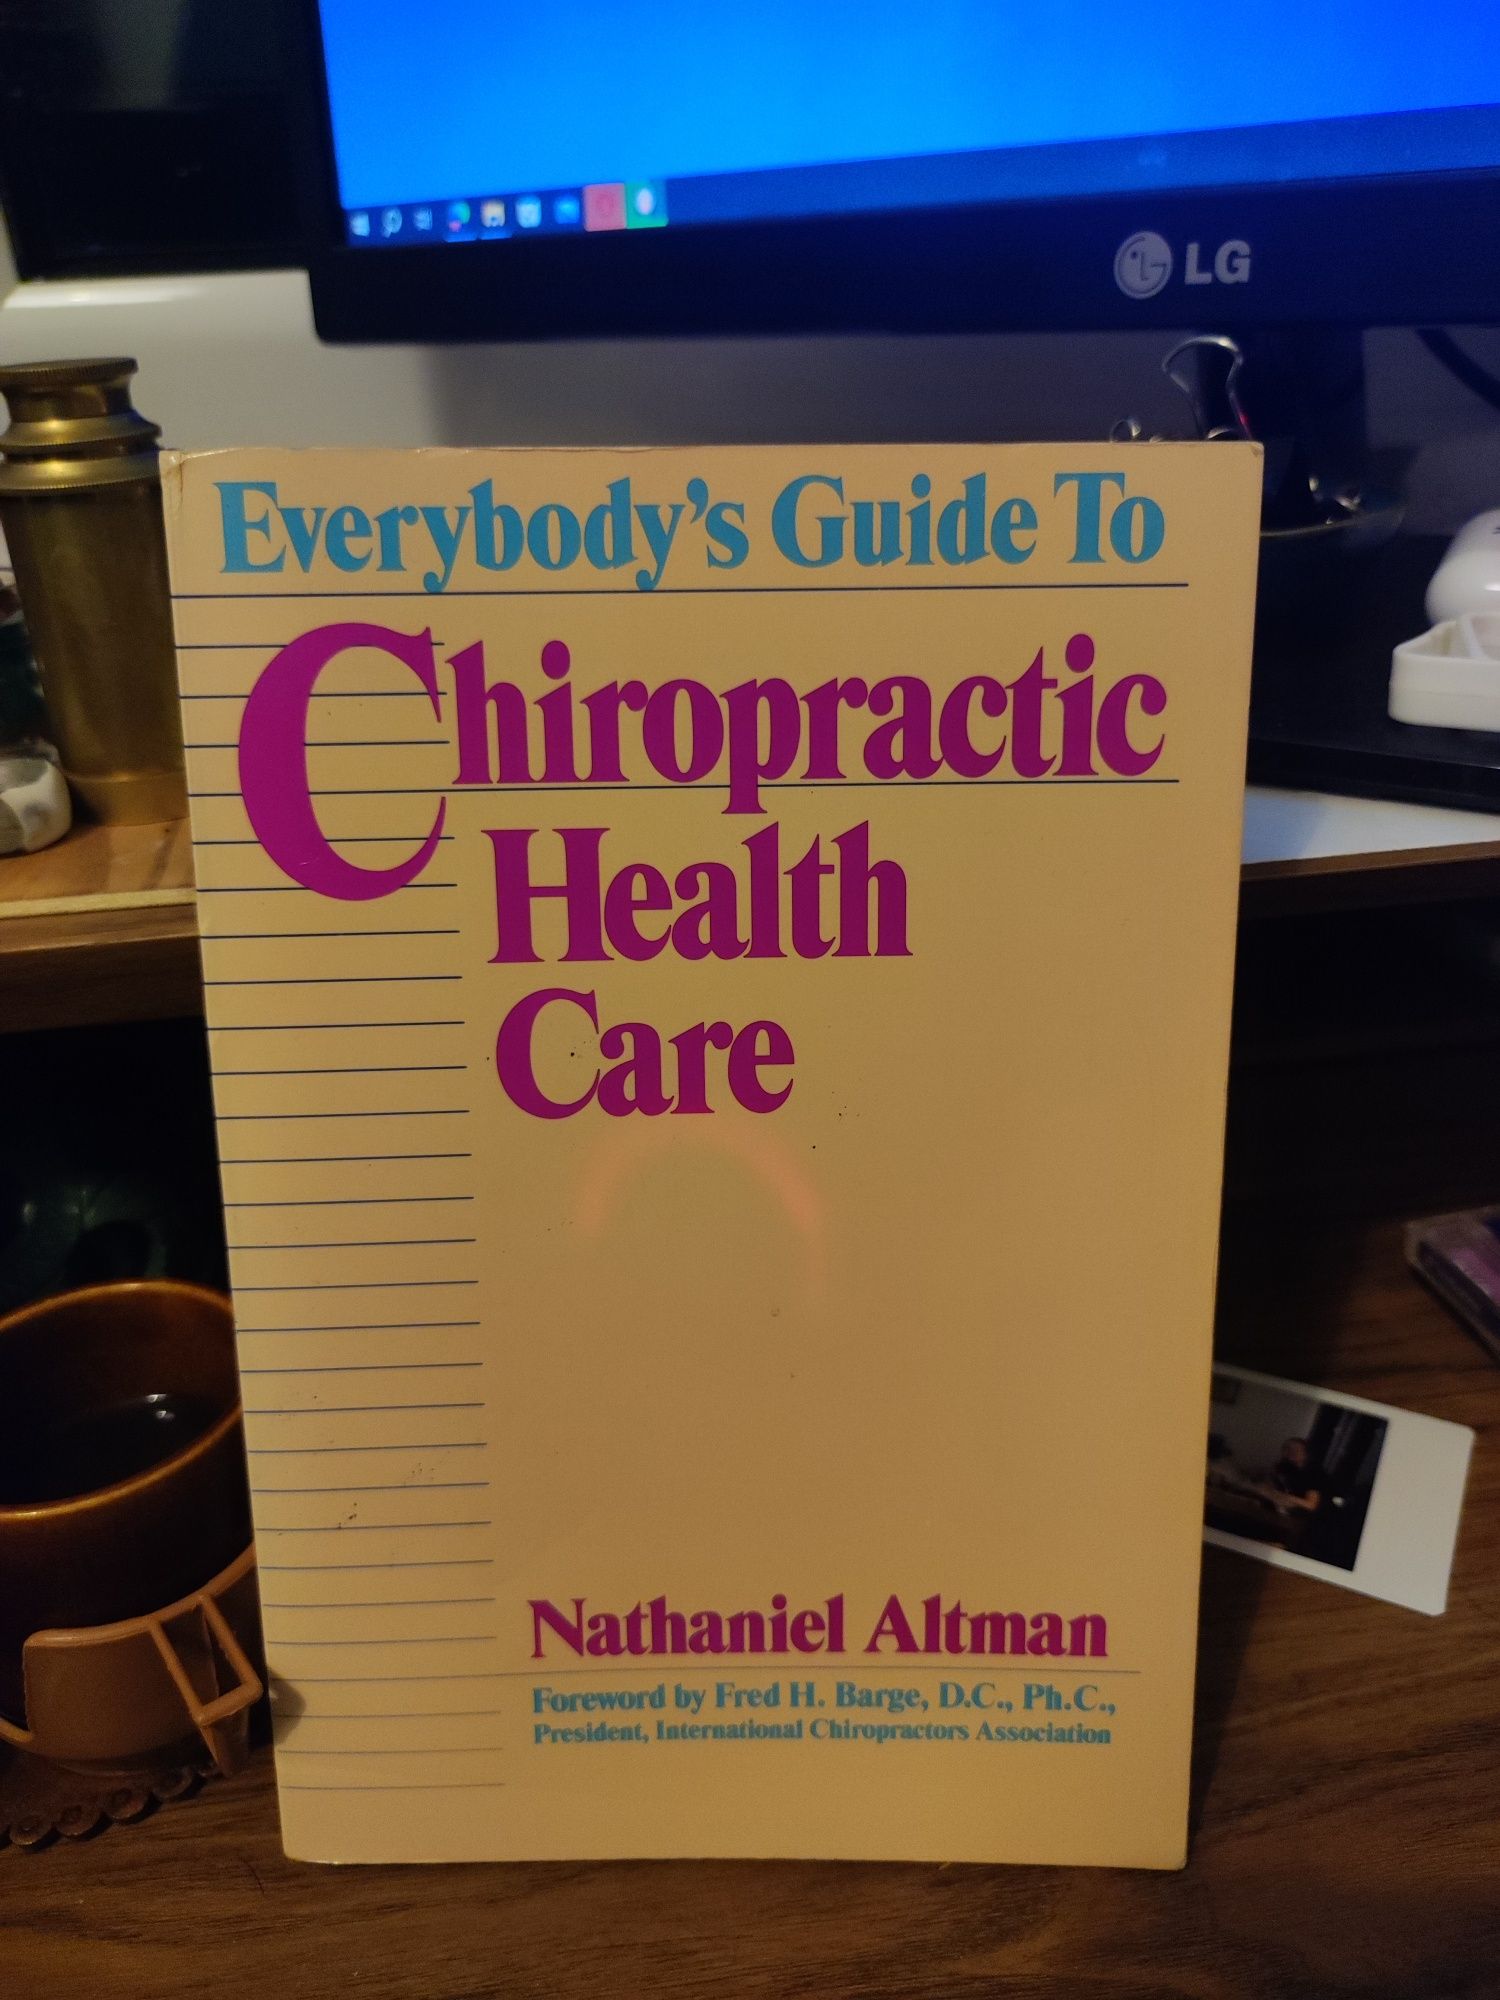 Everybody's Guide to Chiropractic Health Care (Nathaniel Altman)